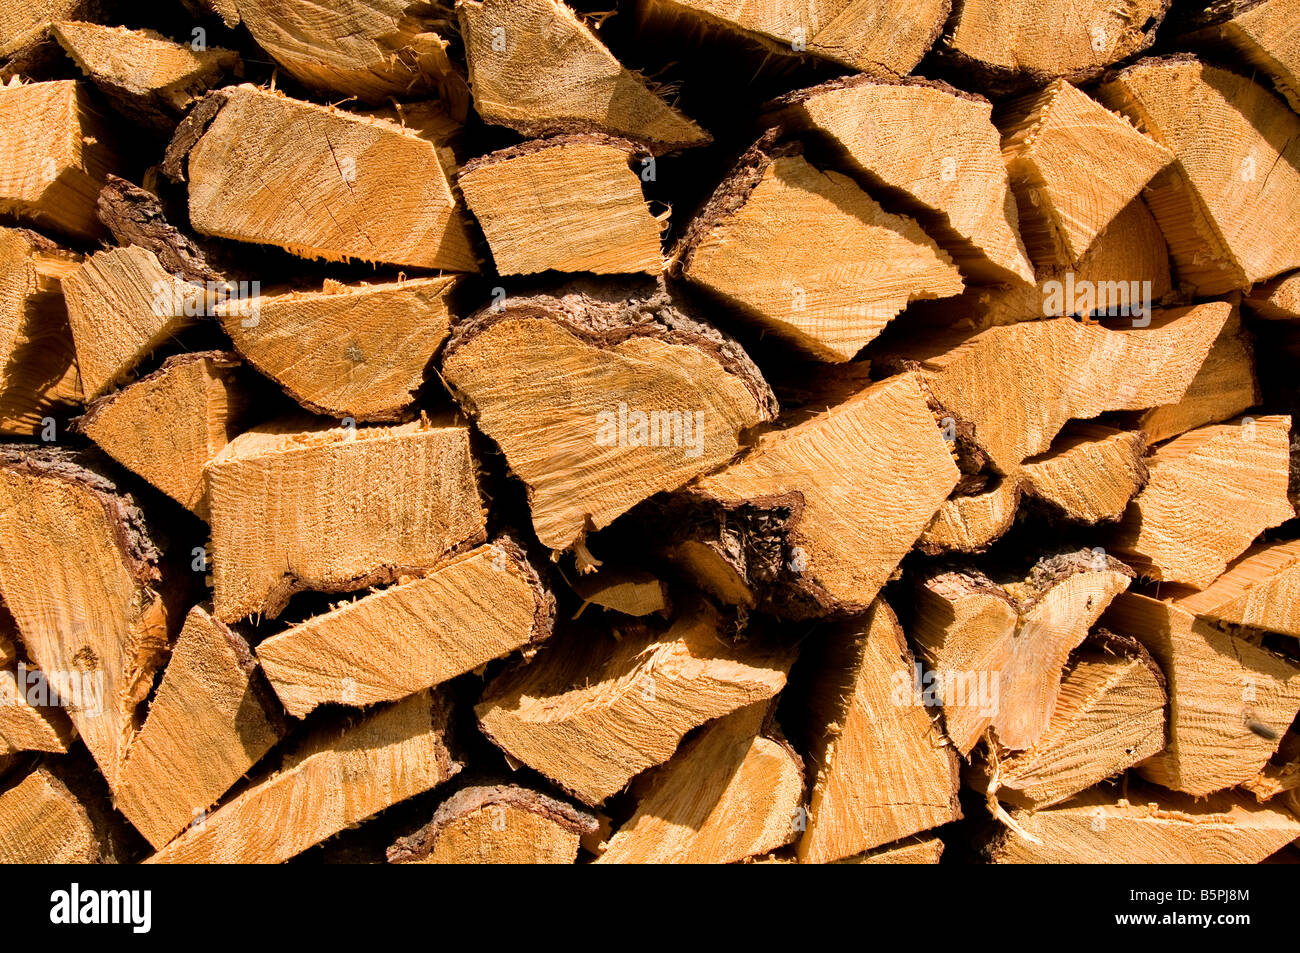 Firewood Cut and Stored for Winter at a South Cariboo Ranch, British Columbia, Canada. Stock Photo